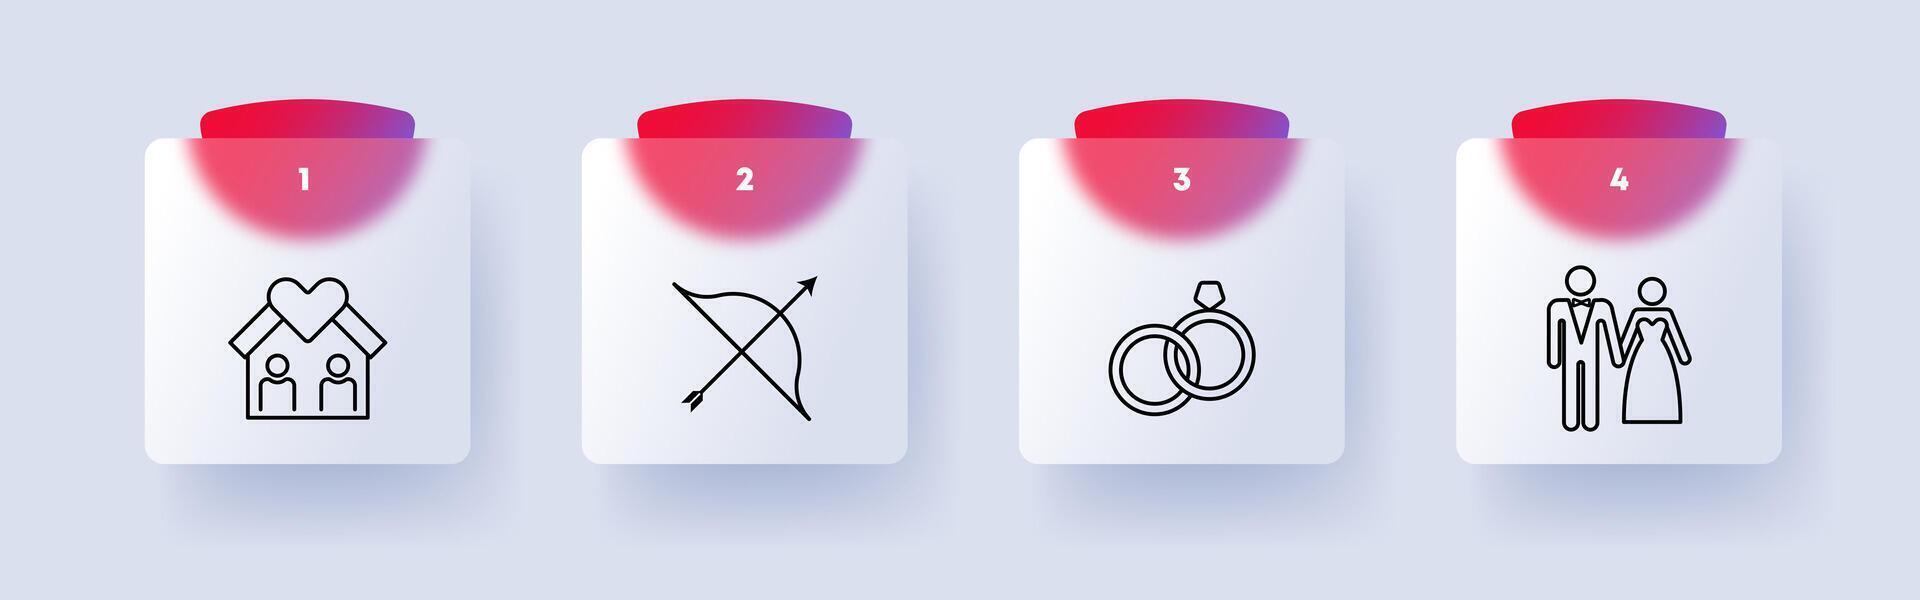 Wedding icon set. House, living together, bow, rings, man, woman, wedding suit and dress, heart, love, getting married, numbering. Concept of starting a relationship. Glassmorphism style. vector